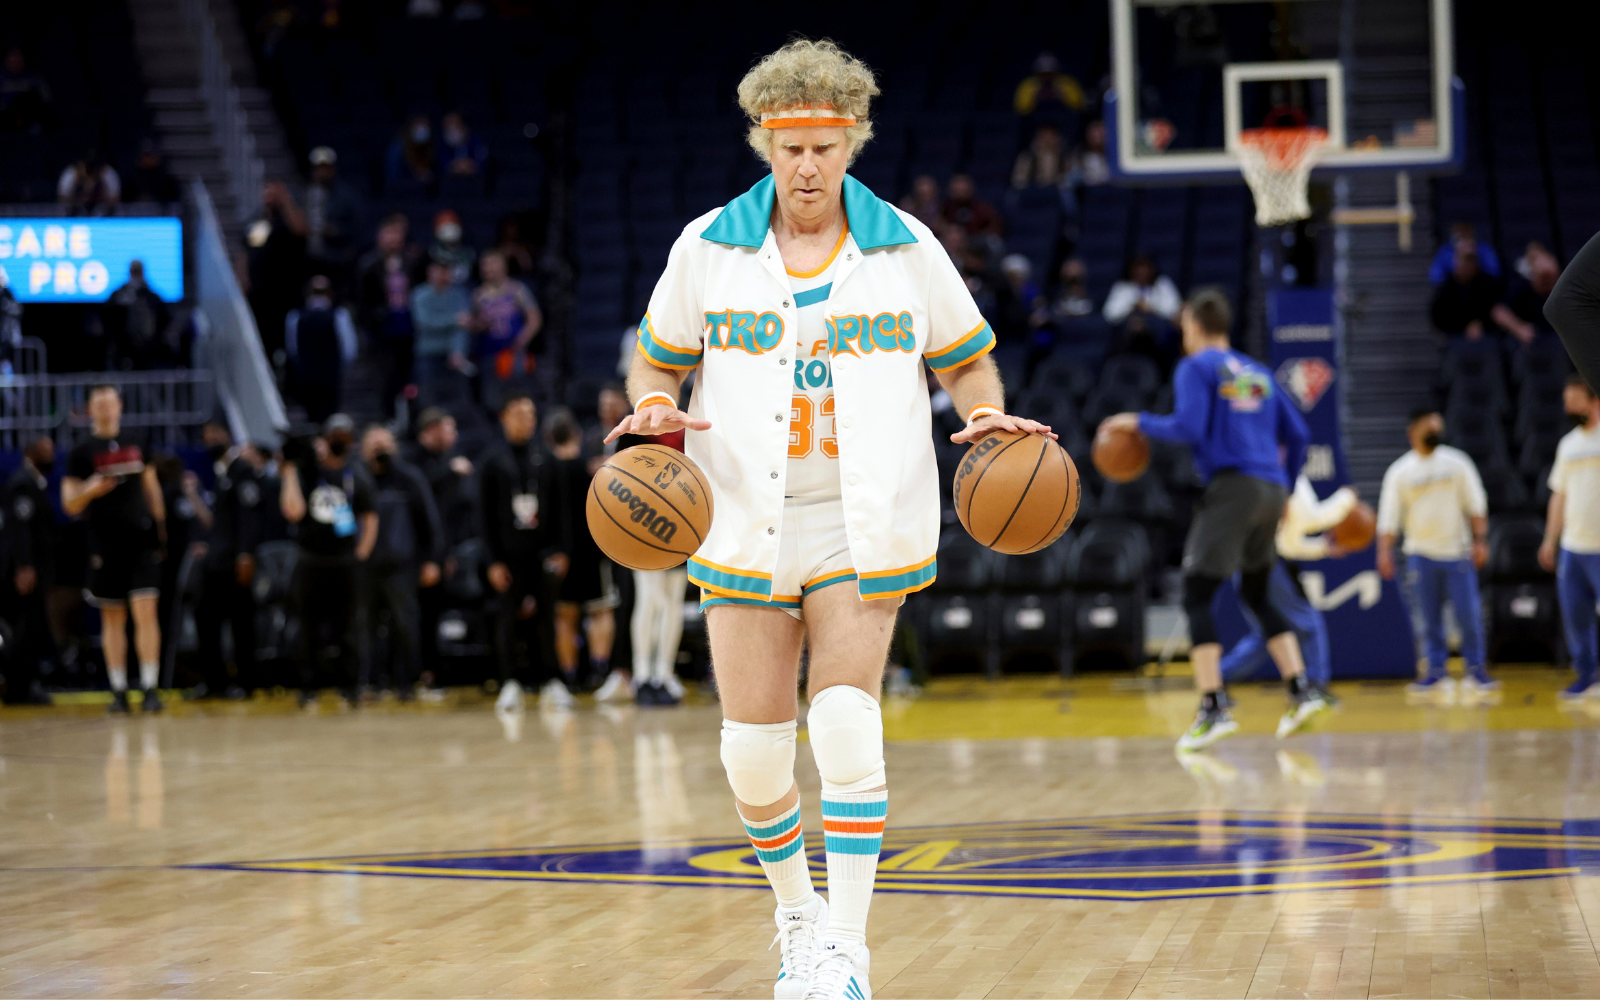 Will Ferrell warmed up with Warriors Klay Thompson dressed as